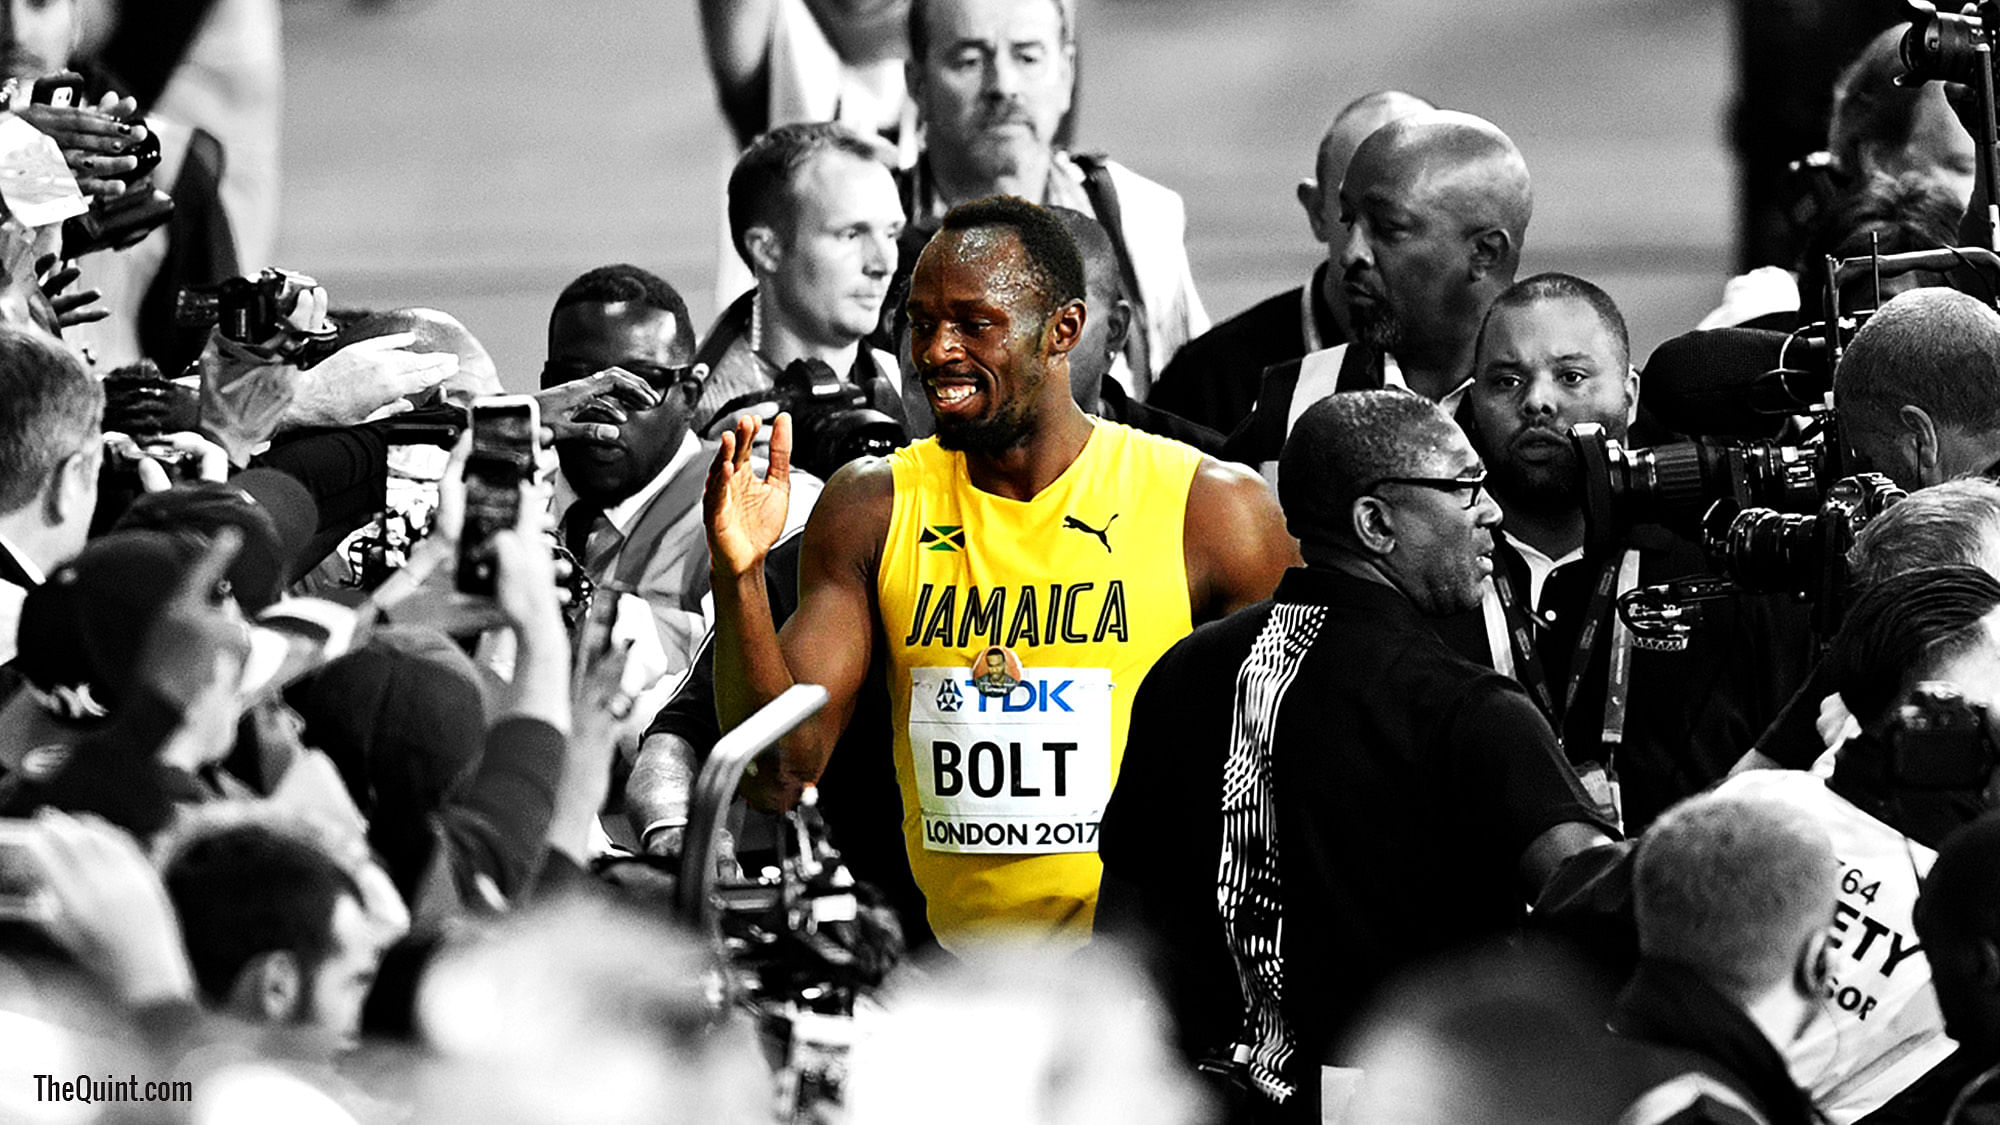 Usain Bolt ran his career’s final race at the World Championships in London in August 2017.